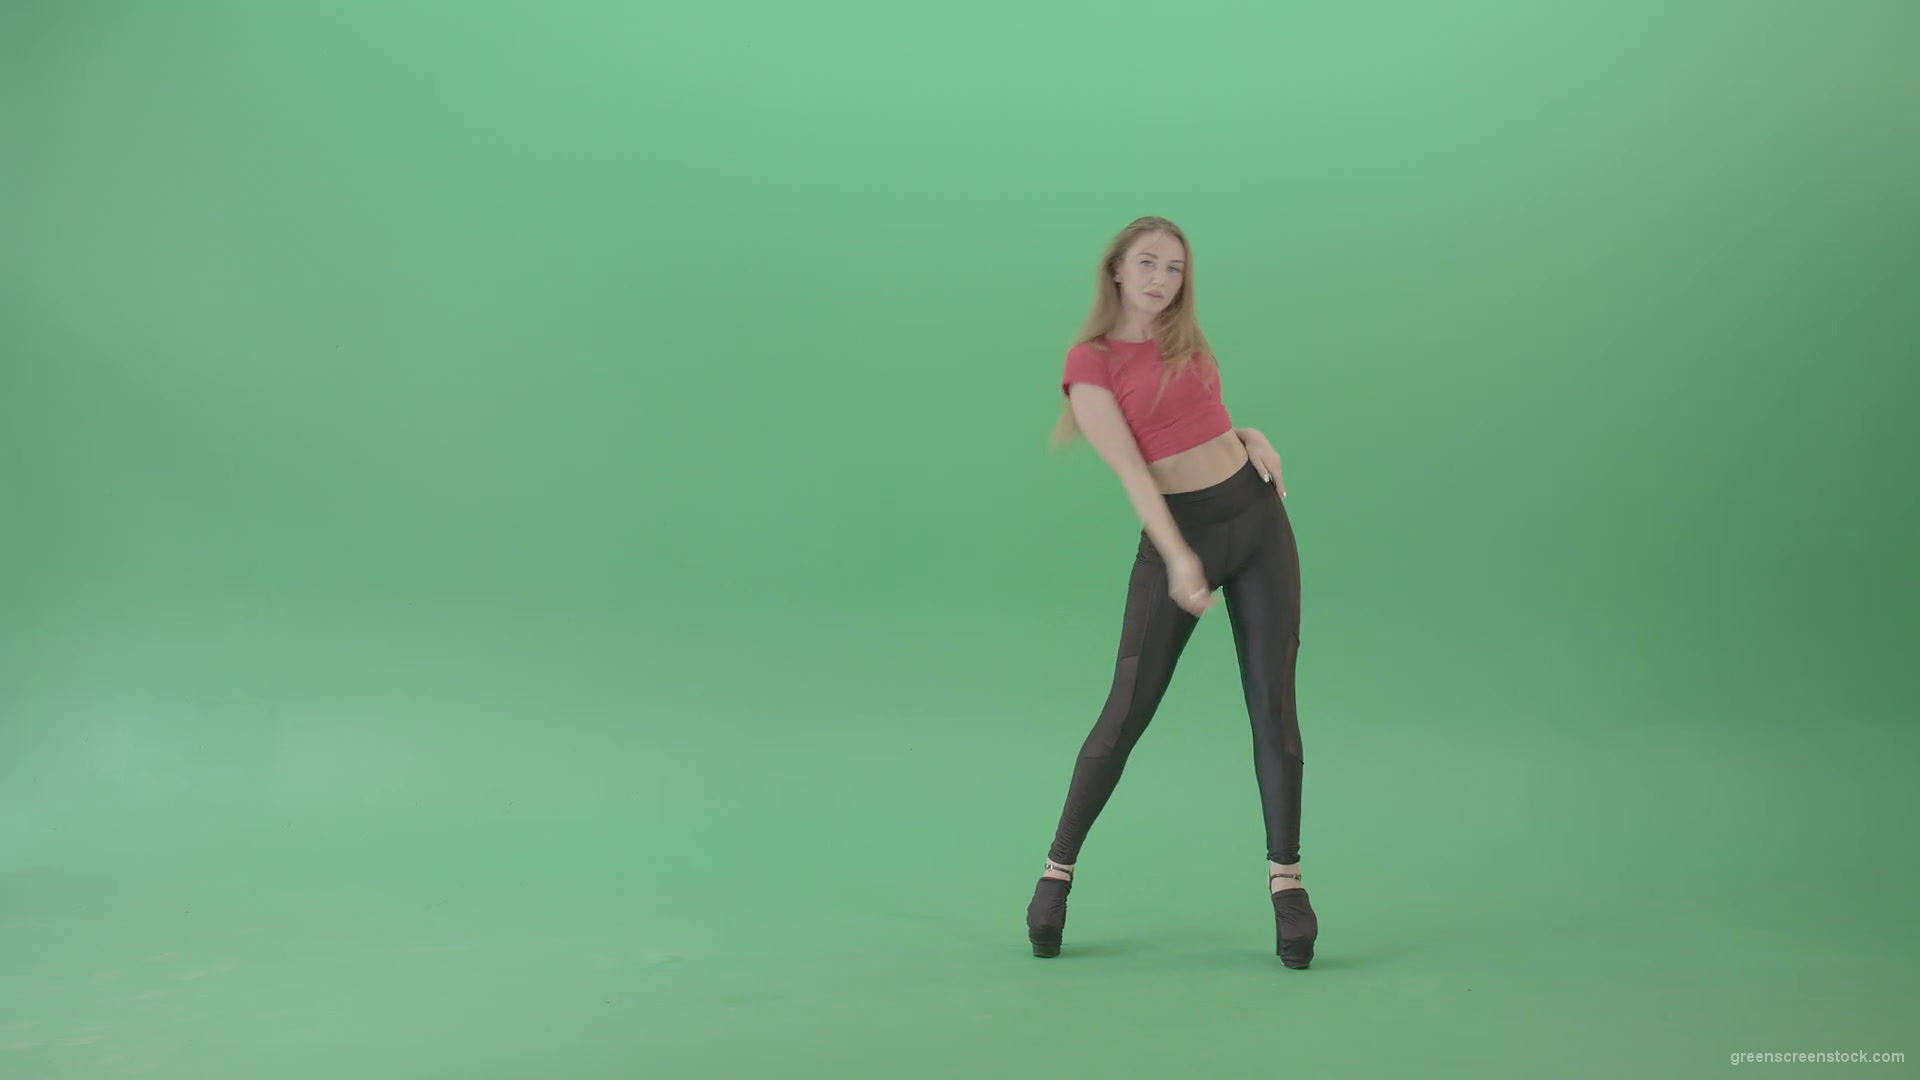 Passion-sexy-girl-on-green-screen-in-red-posing-strip-dance-4K-Video-Footage-1920_008 Green Screen Stock